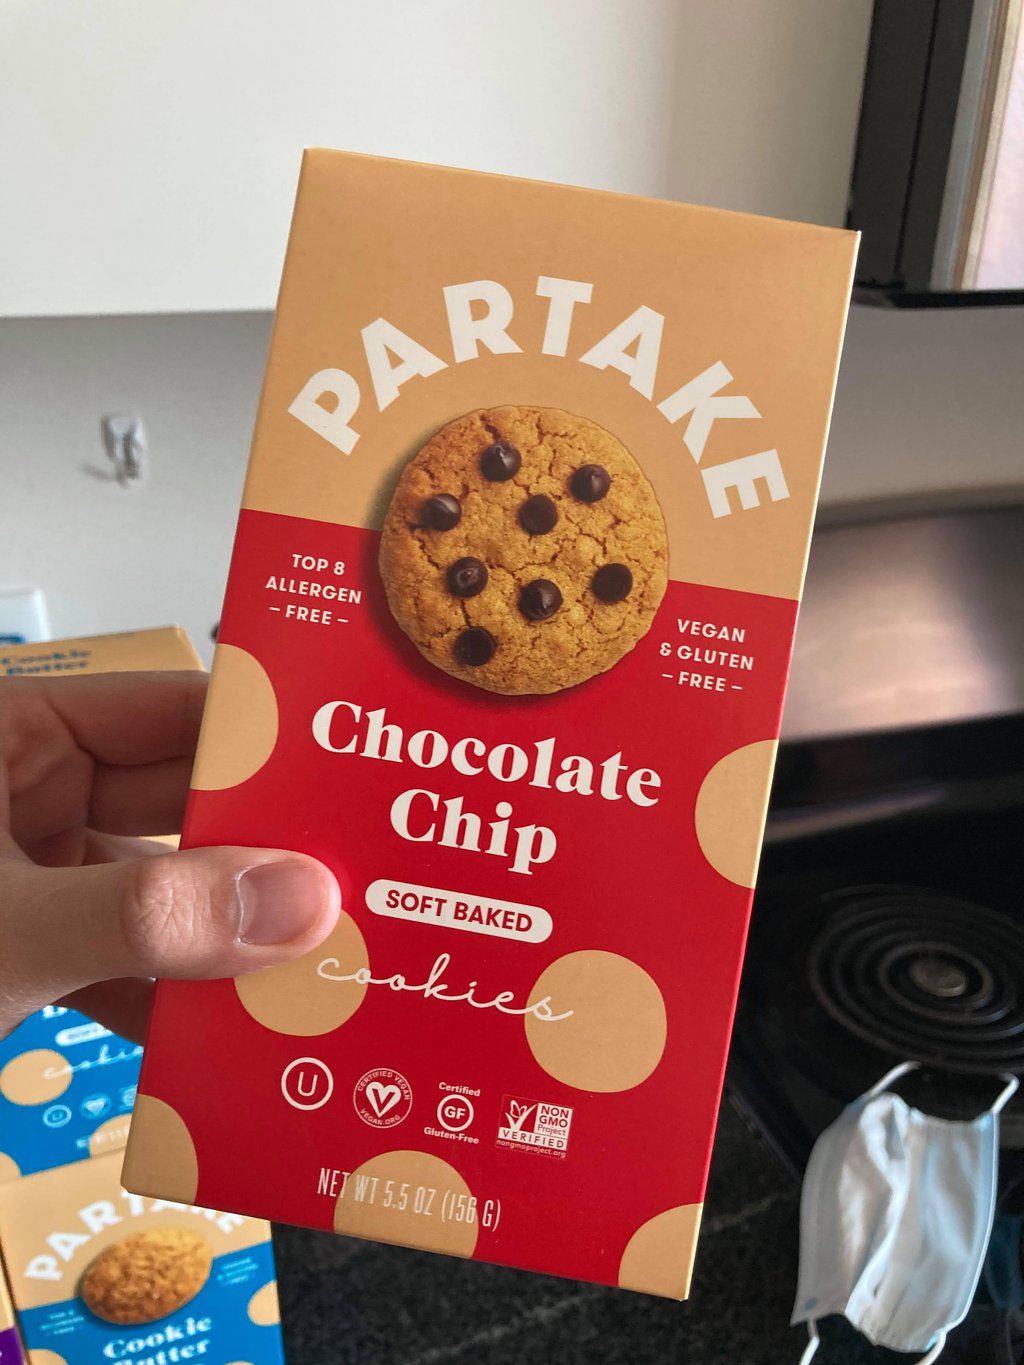 Soft Baked Chocolate Chip Cookies - Partake Foods